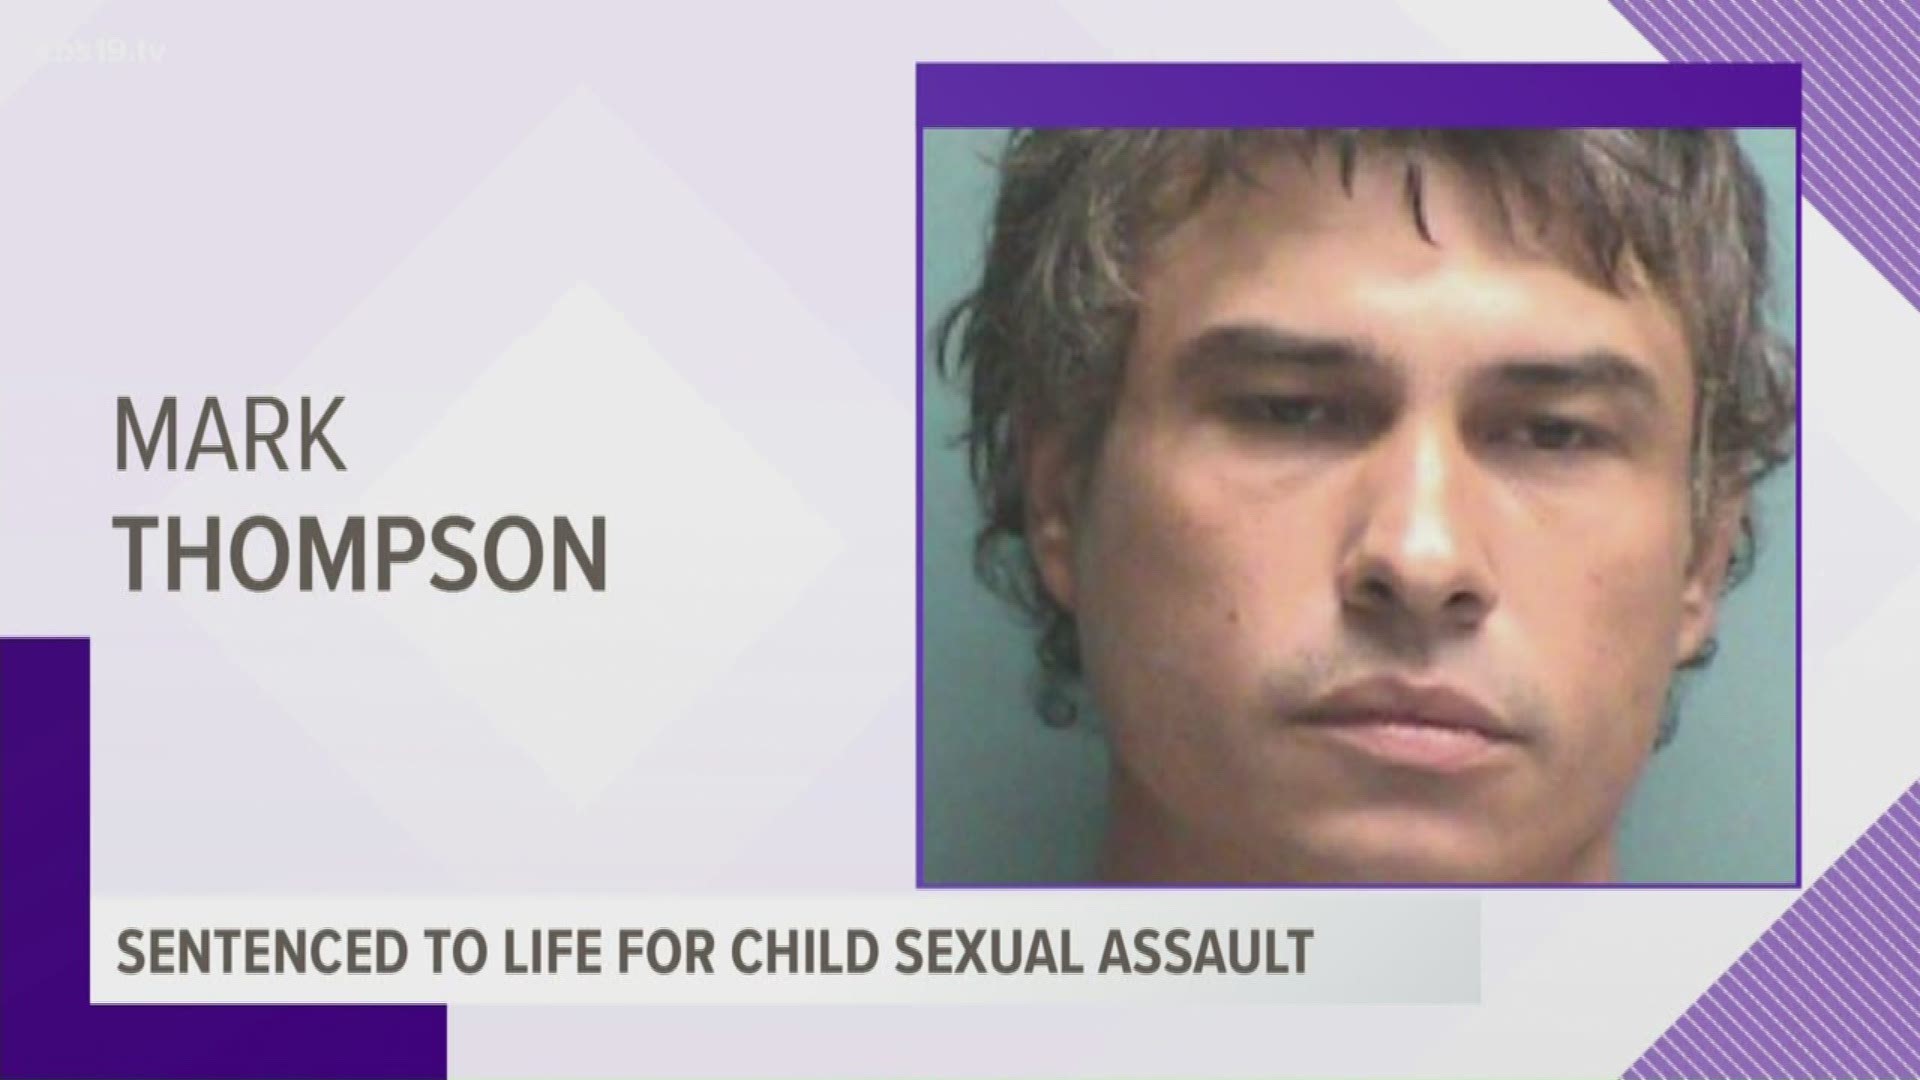 According to judicial records, Mark Allen Thompson, 35, was charged with 29 crimes related to child sexual assault.